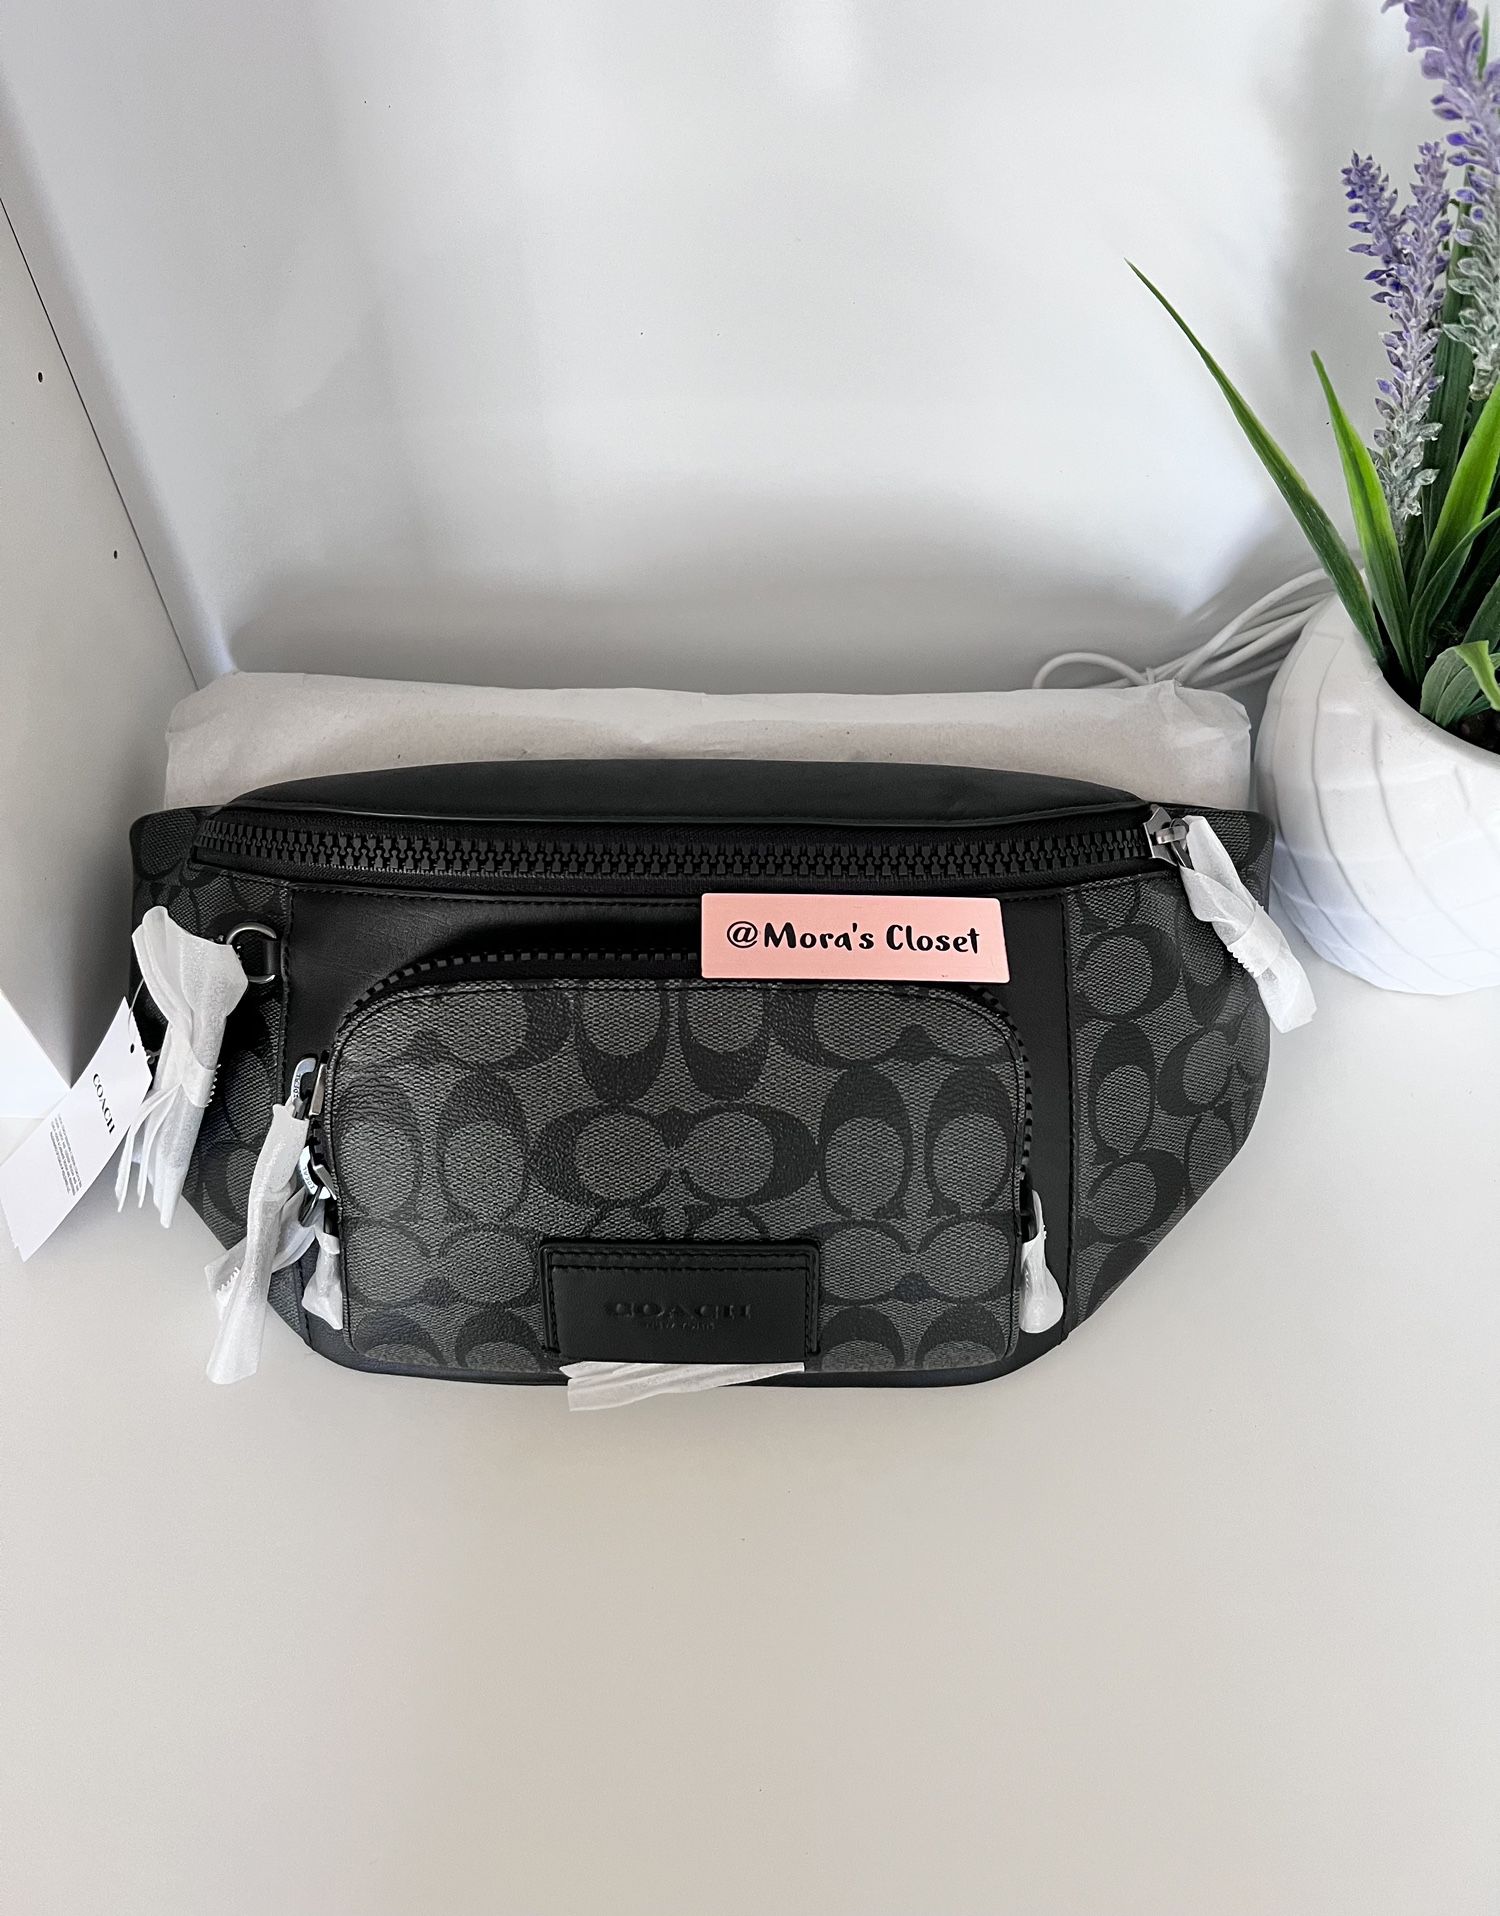 Supreme Reflective Repeat 3m Shoulder Bag Red FW16 Cordura Box Logo for  Sale in Tracy, CA - OfferUp